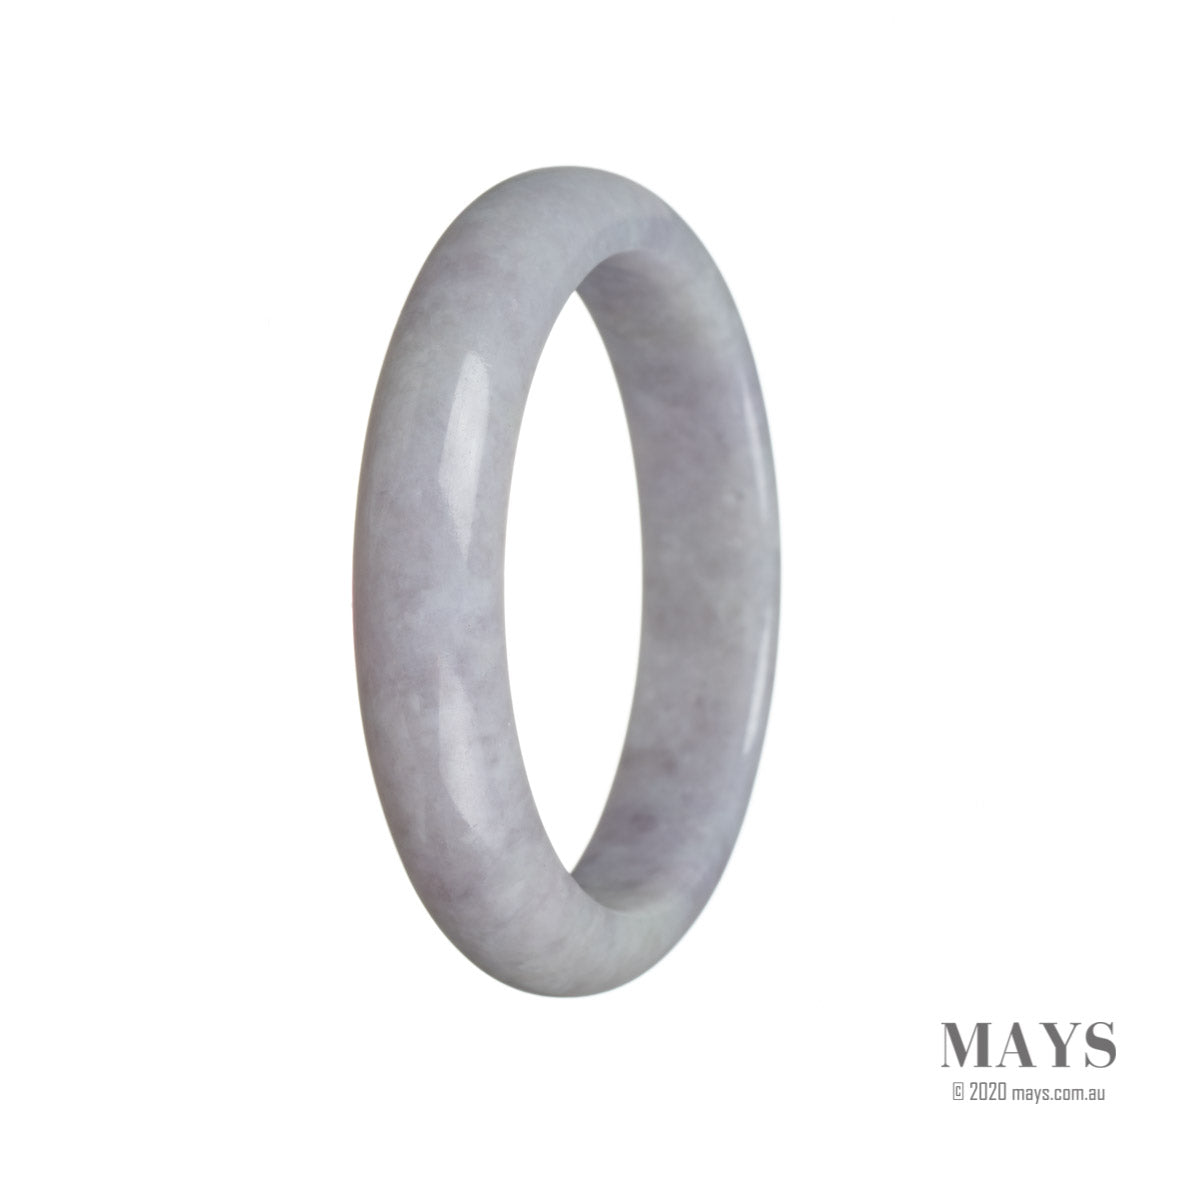 A lavender Burma jade bangle in a half moon shape, exhibiting high quality and authenticity.